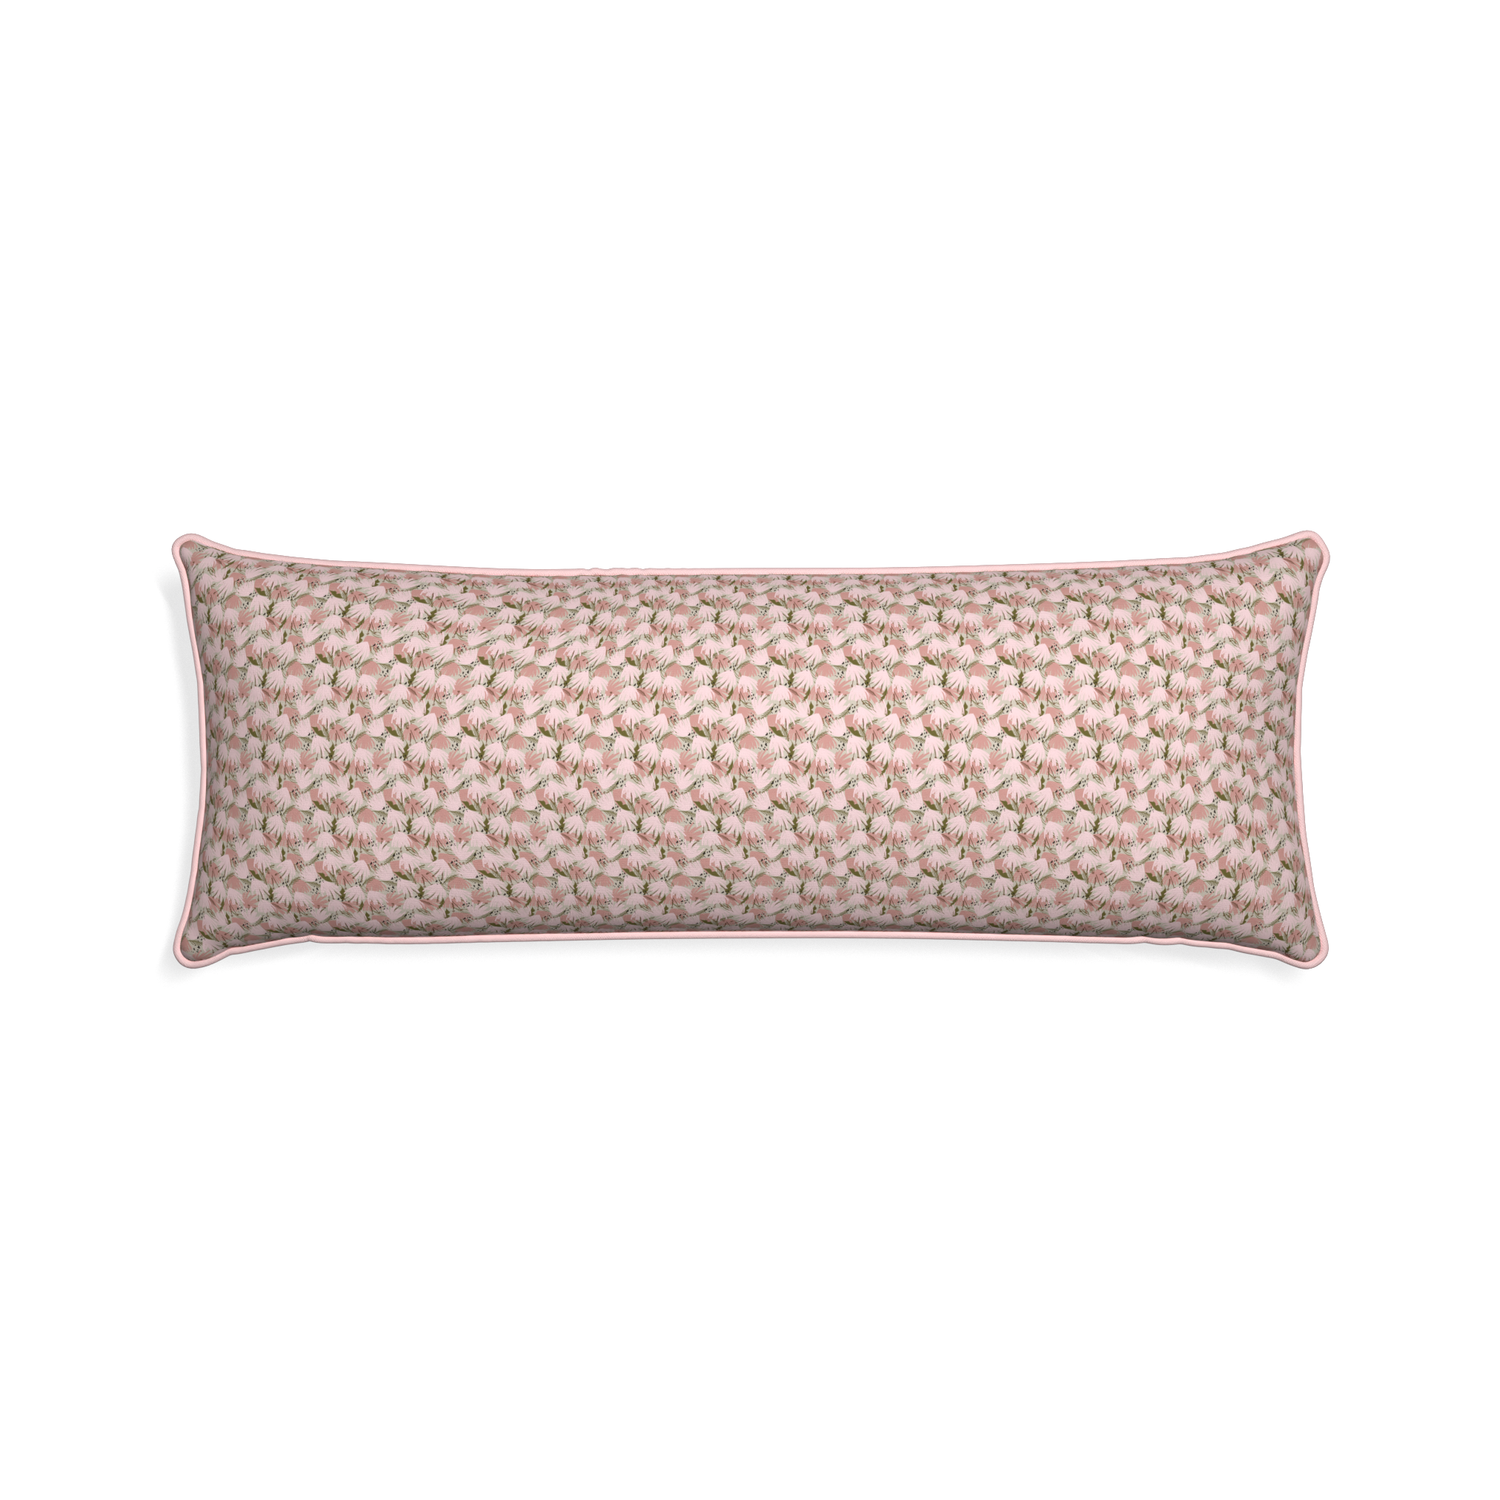 Xl-lumbar eden pink custom pillow with petal piping on white background